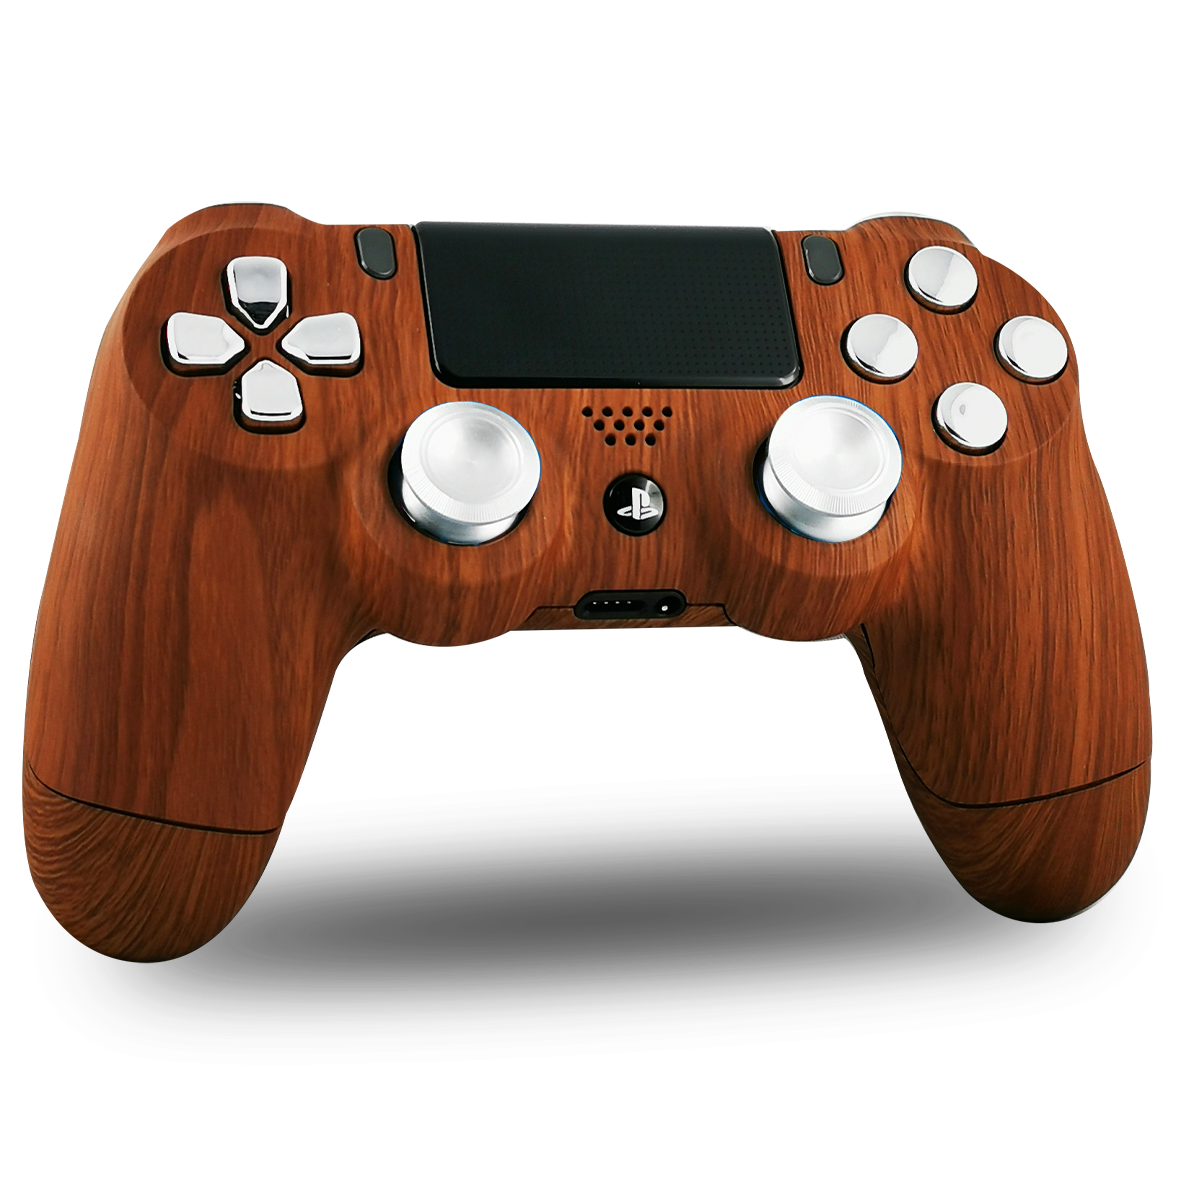 manette-PS4-custom-playstation-4-sony-personnalisee-drawmypad-woody-wood